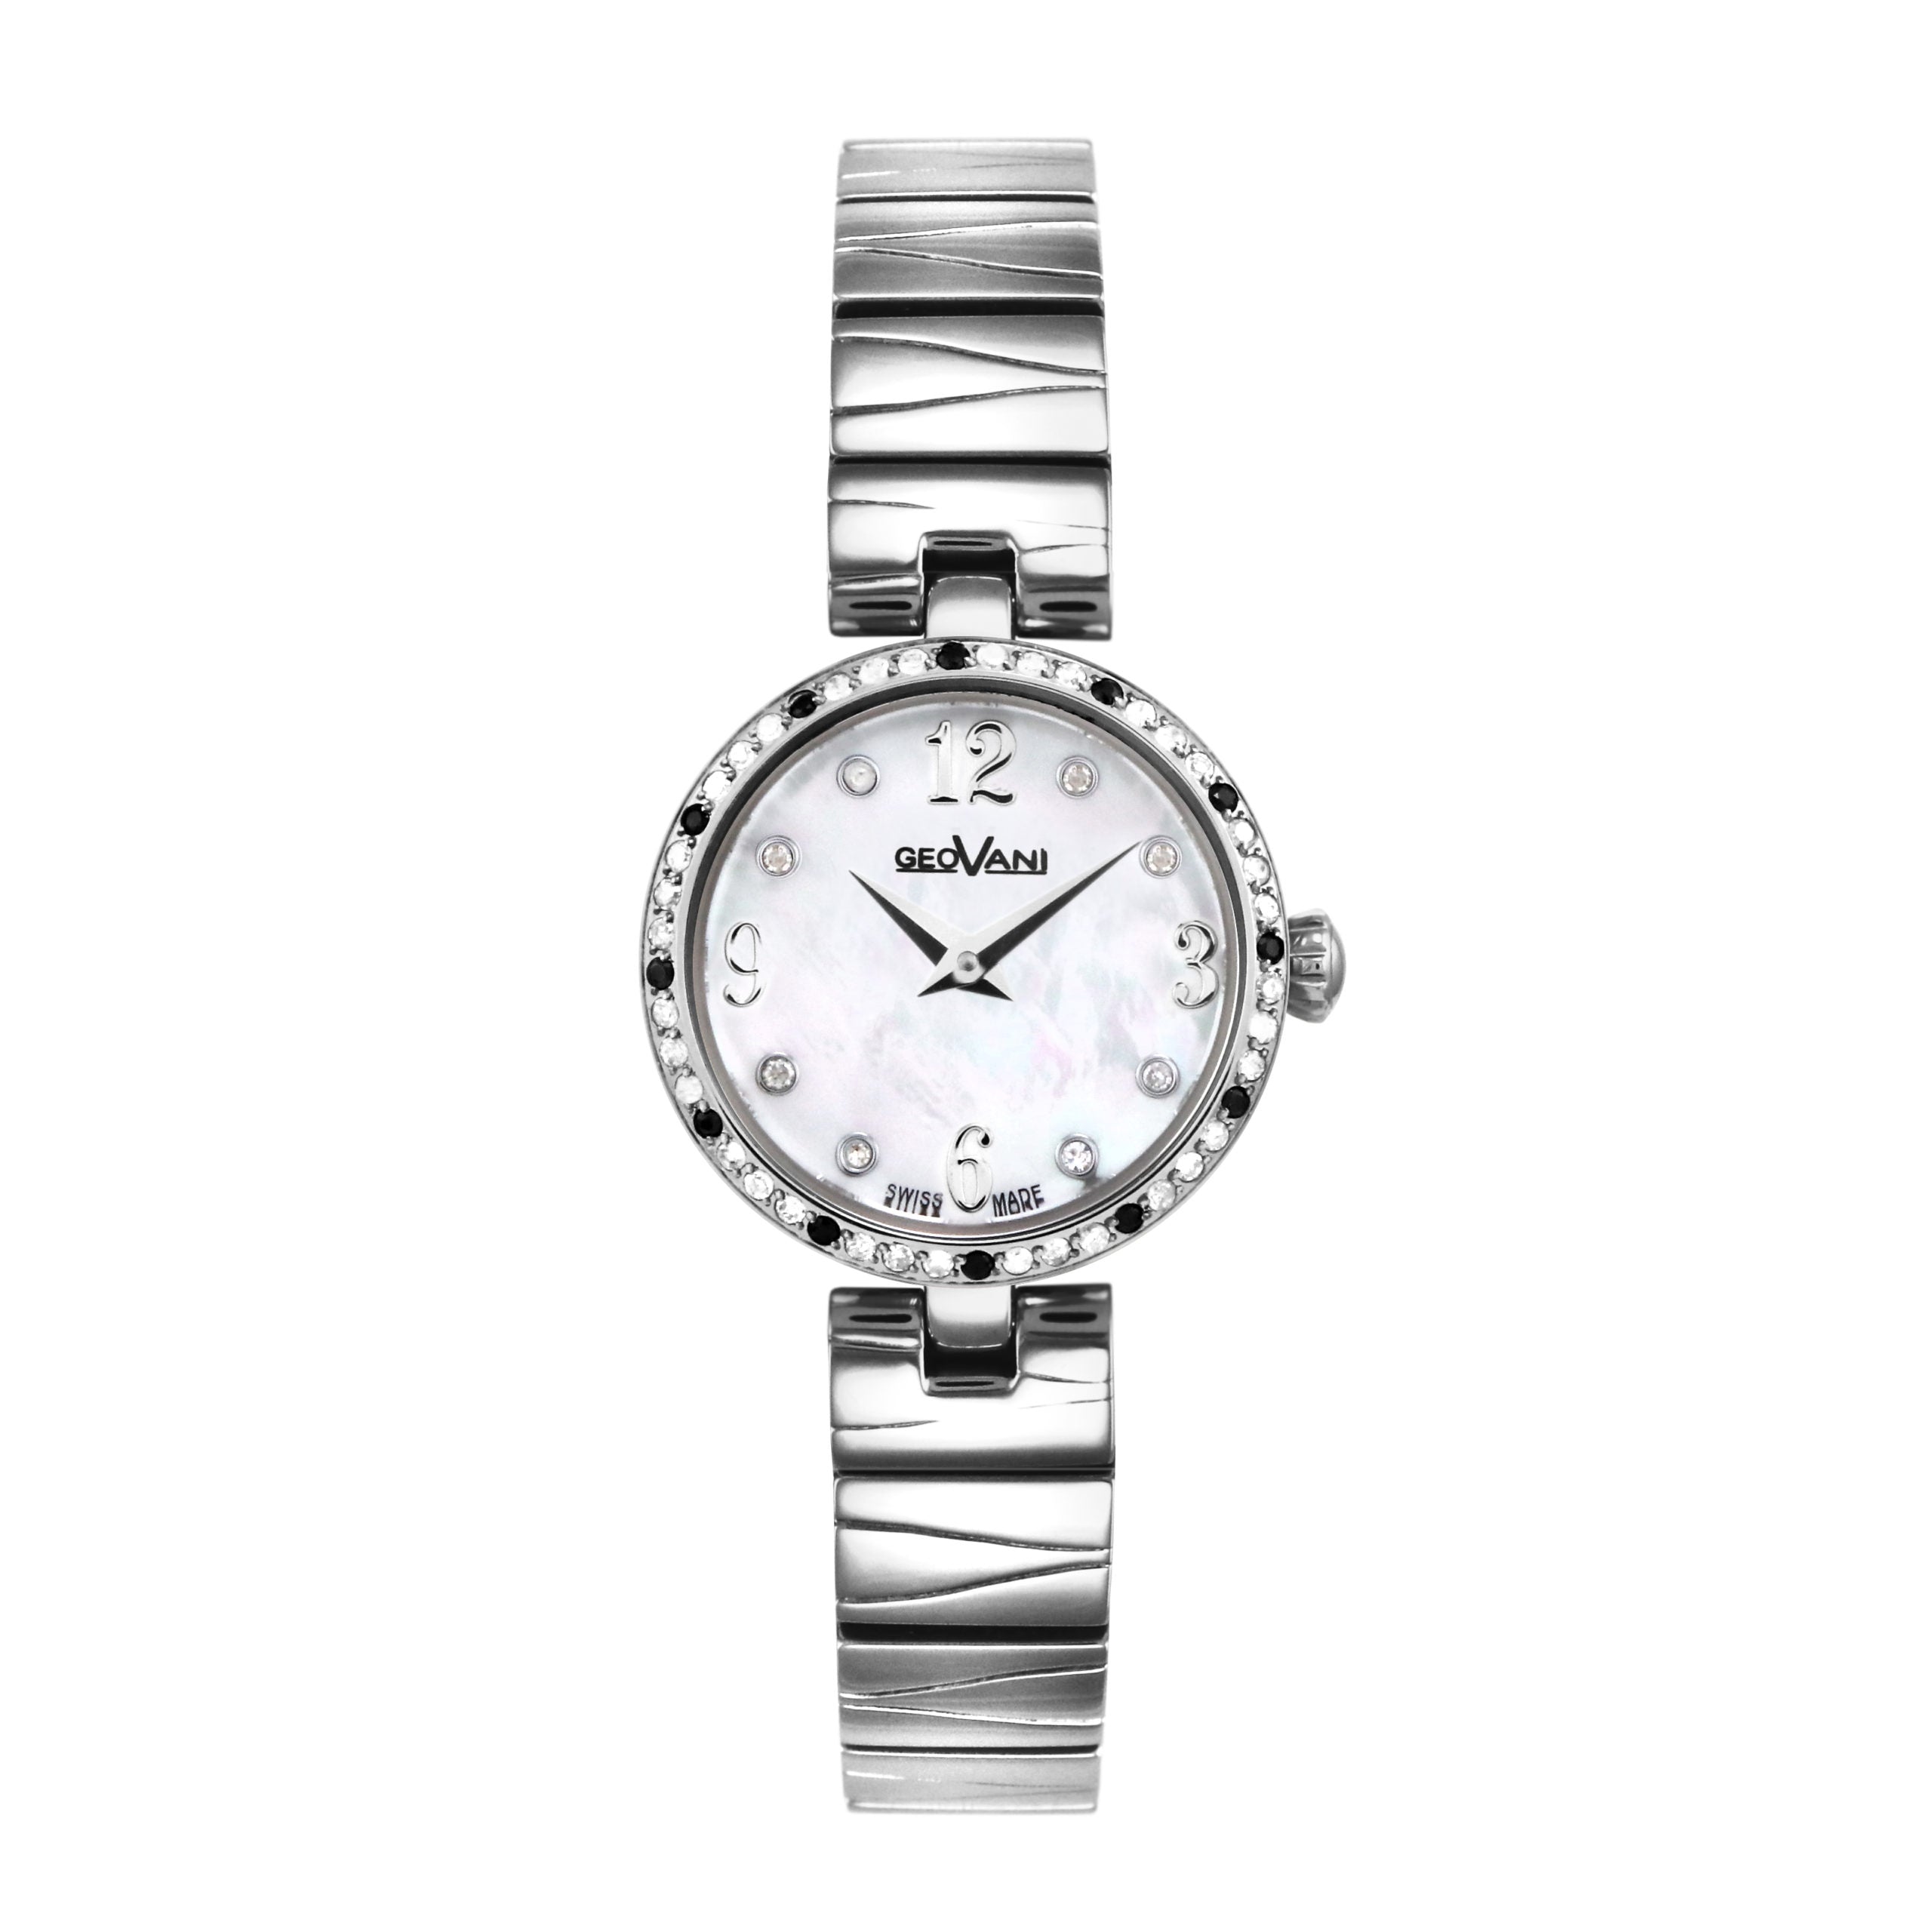 Giovanni Women's Swiss Quartz Watch with Pearly White Dial - GEO-0016